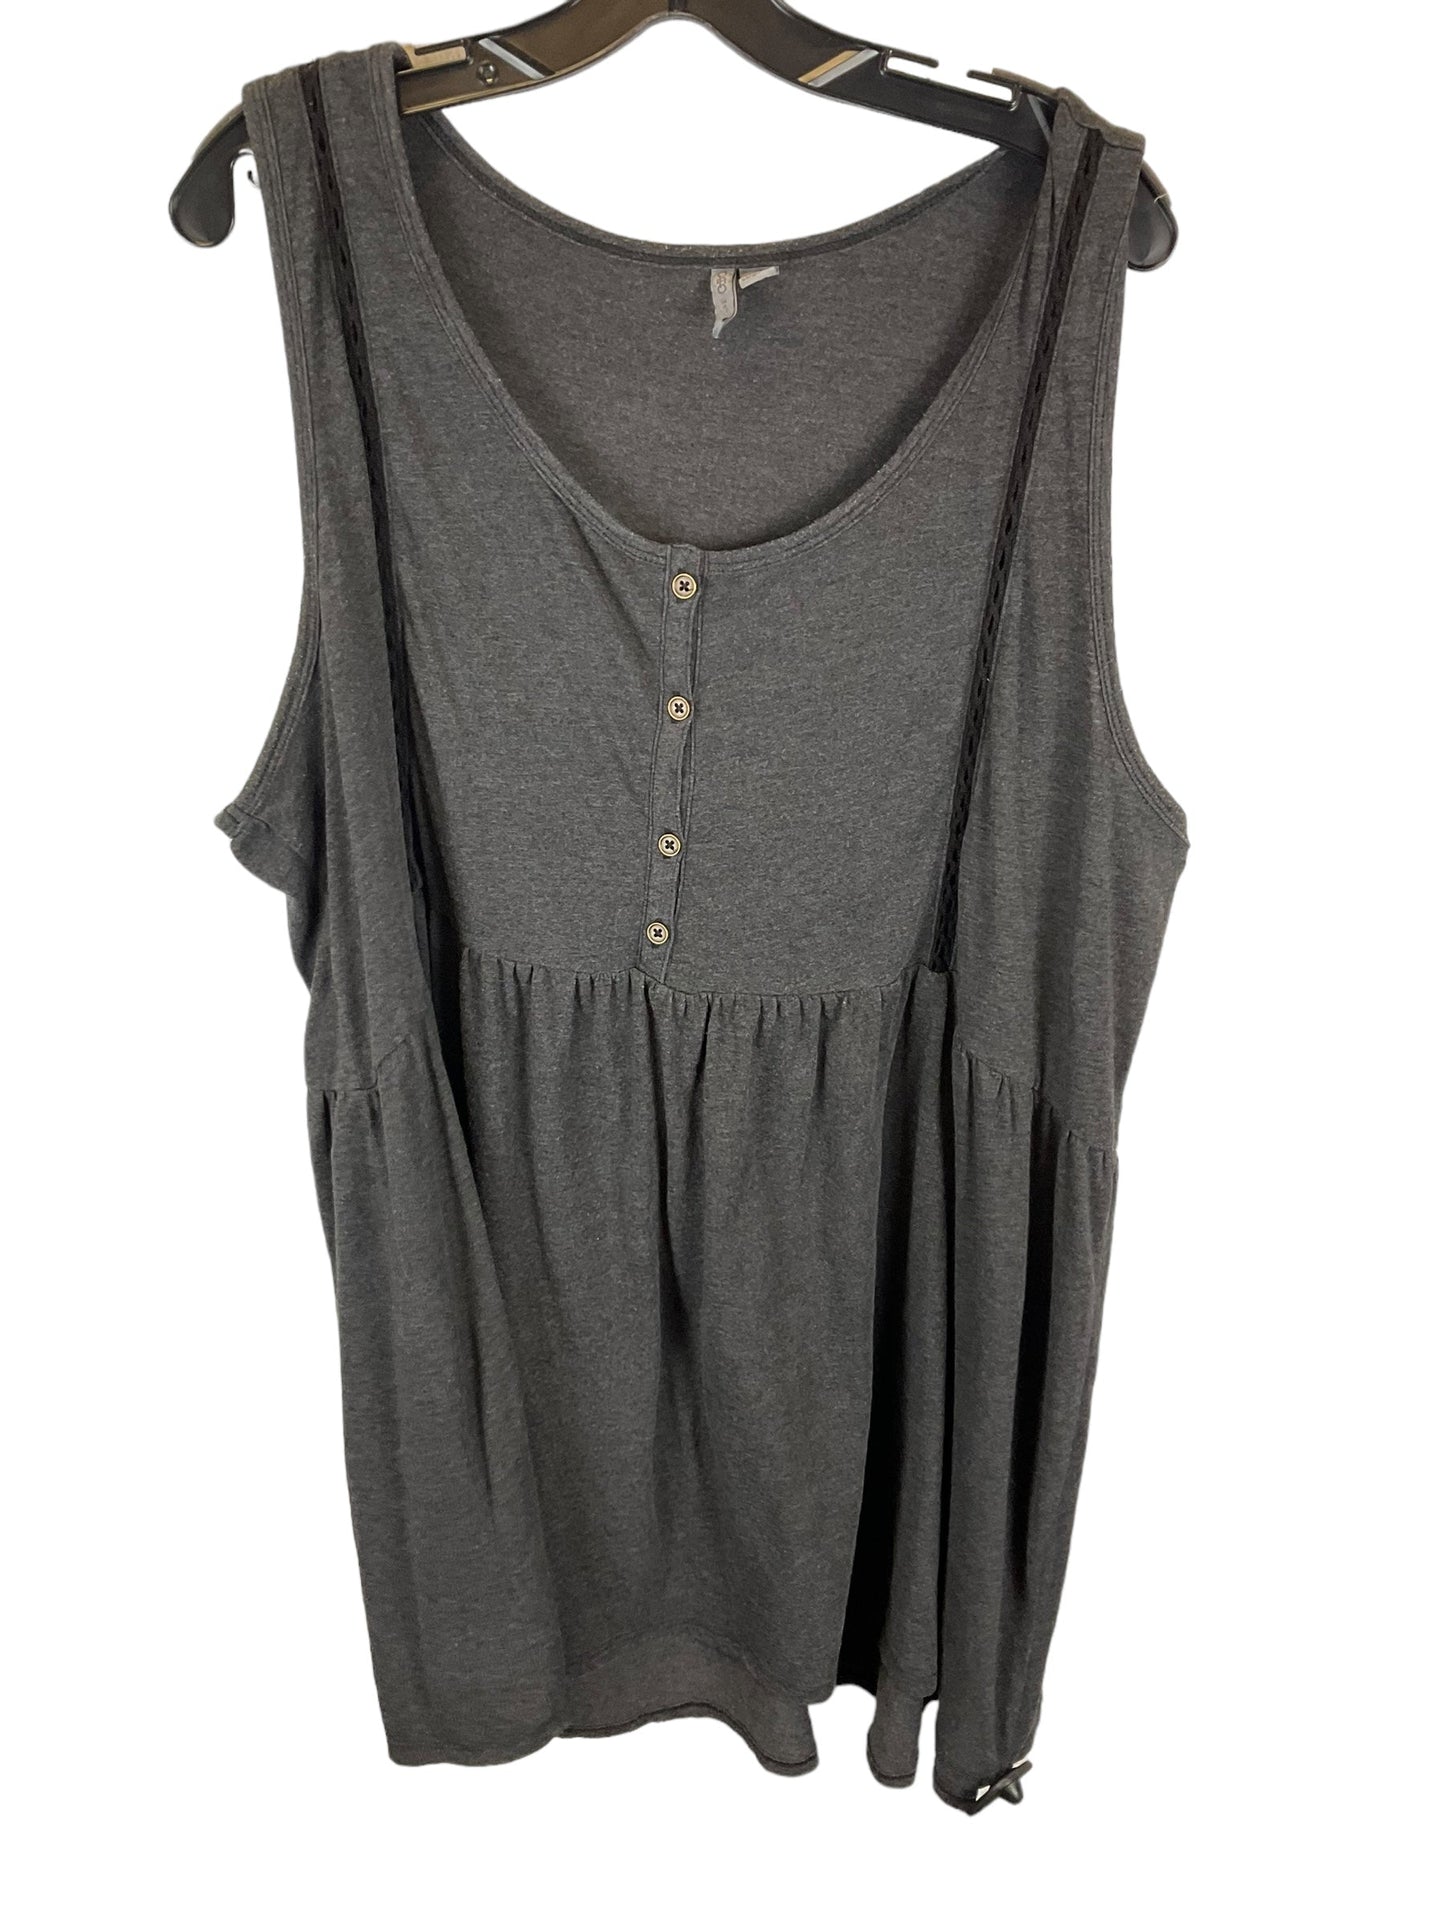 Grey Dress Casual Short Cato, Size 2x